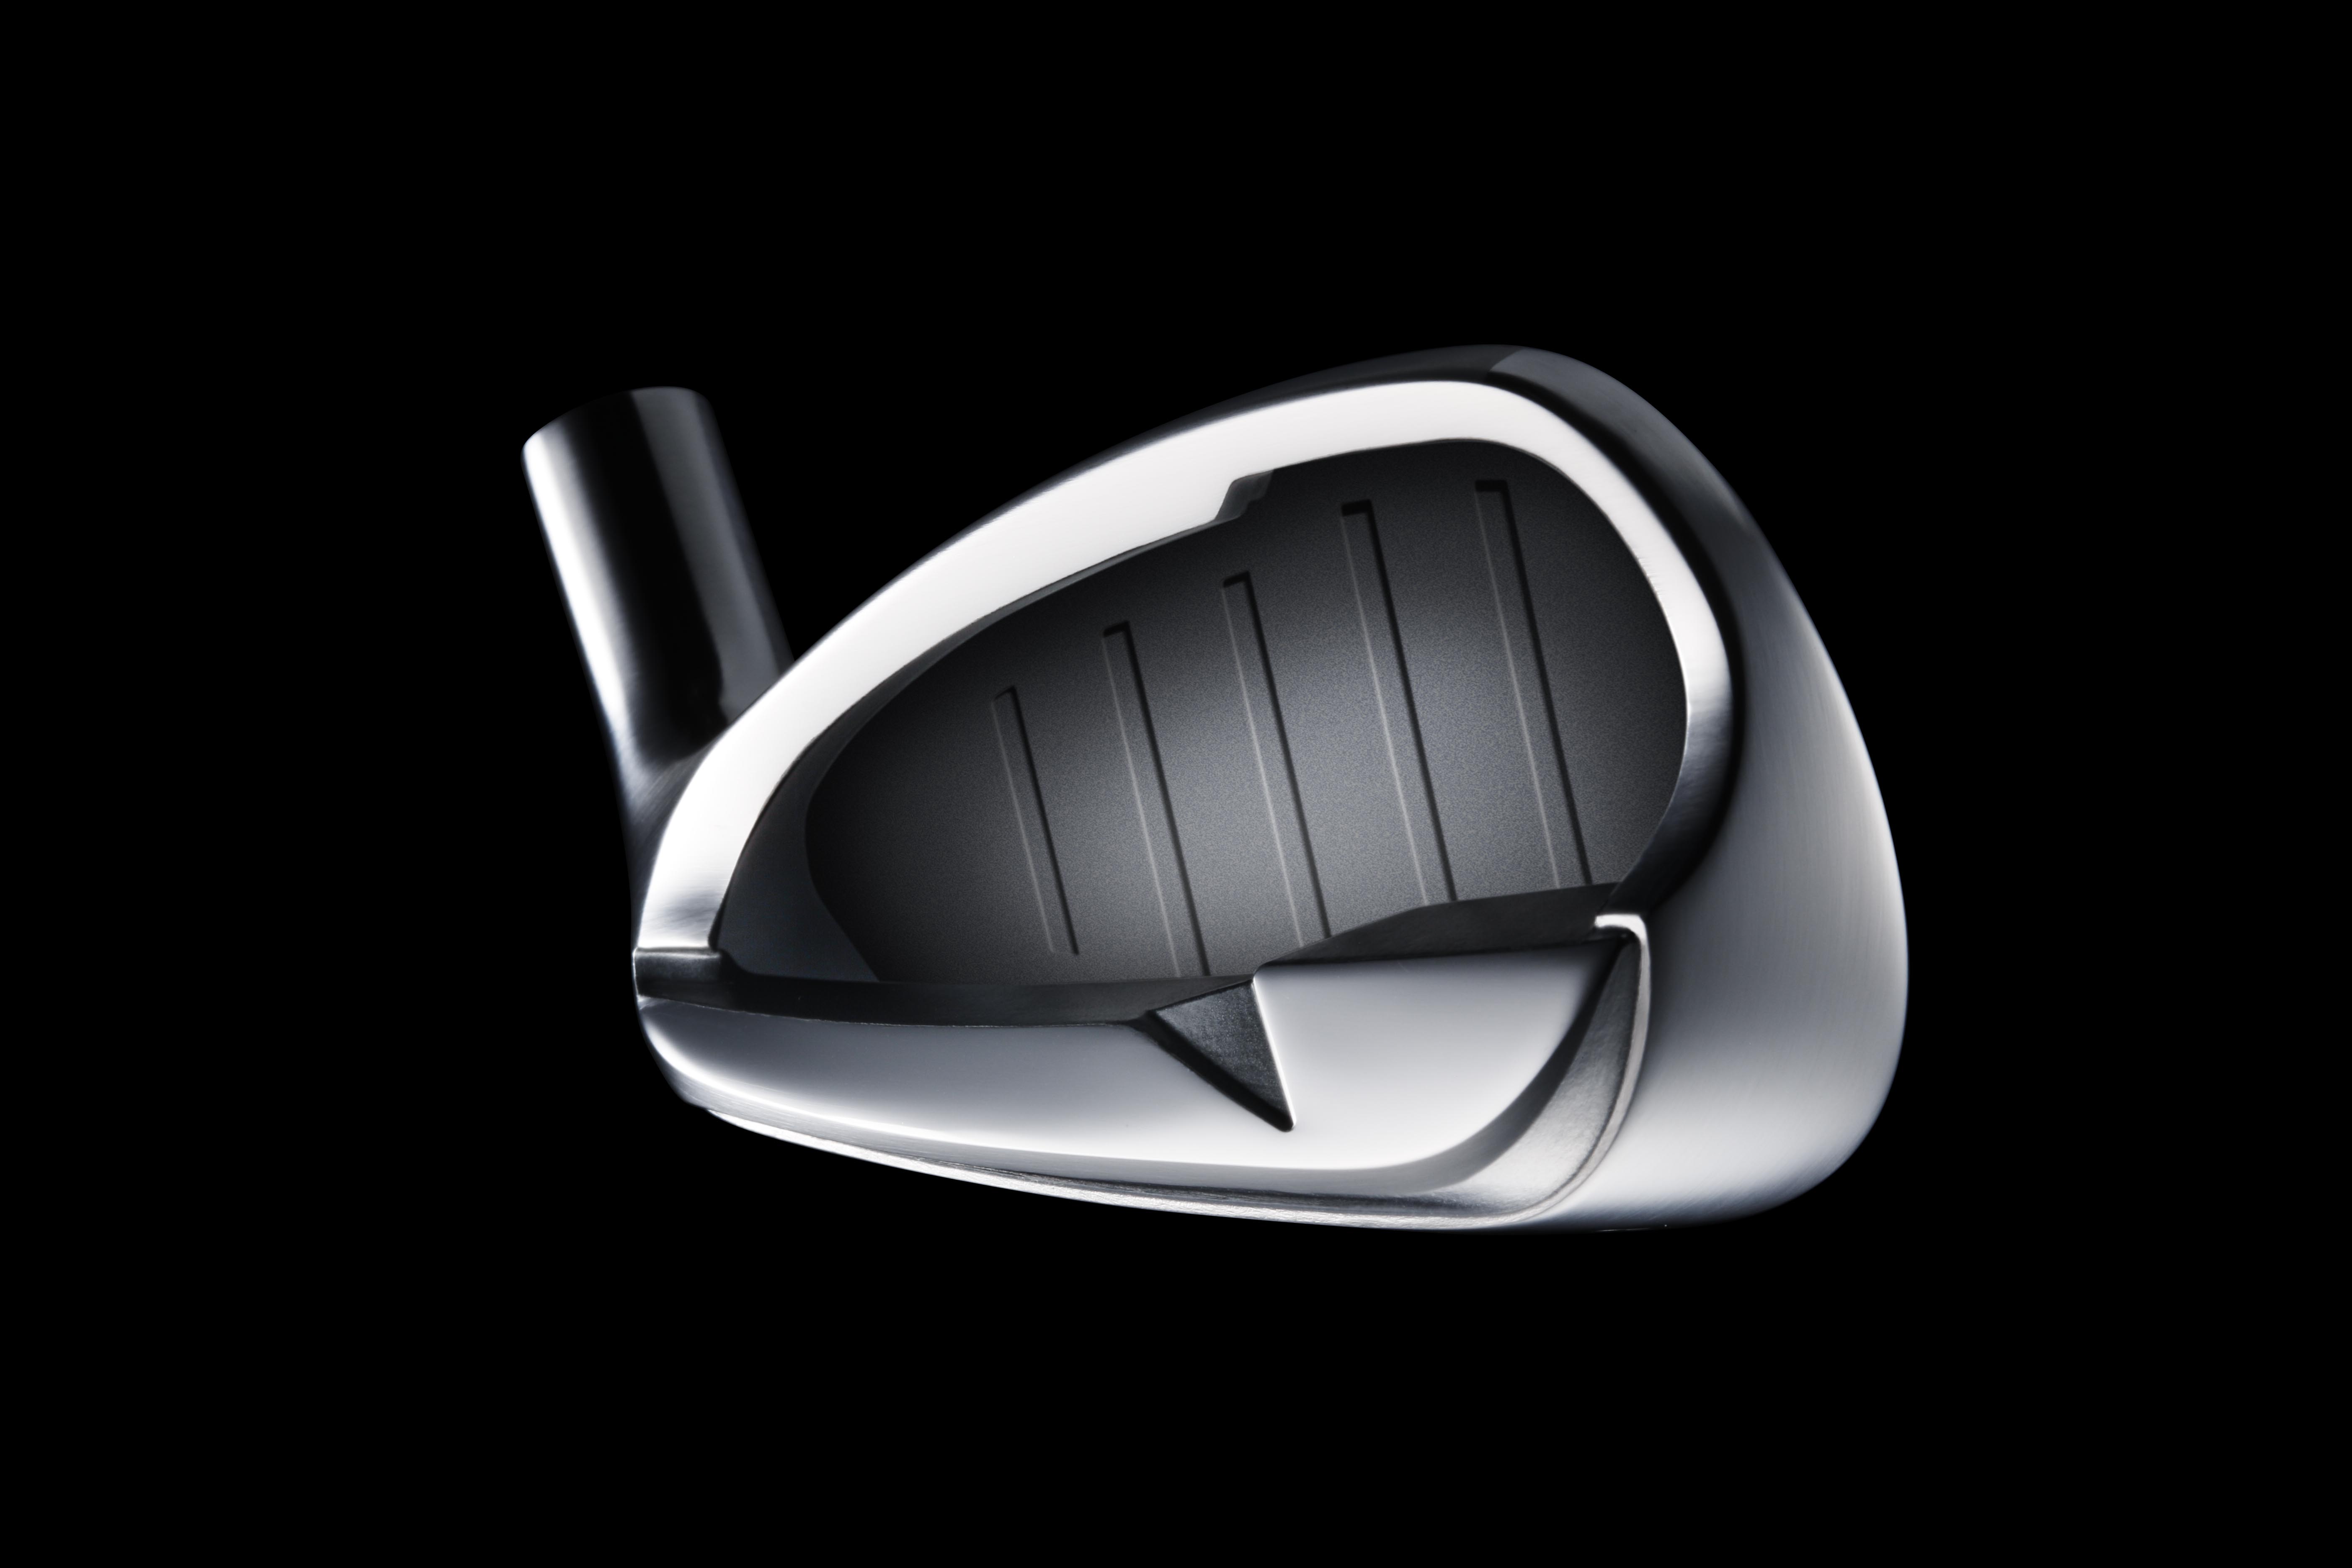 Top Selling Yamaha Inpres UD+2 Irons Improved for 2021 with New Speed